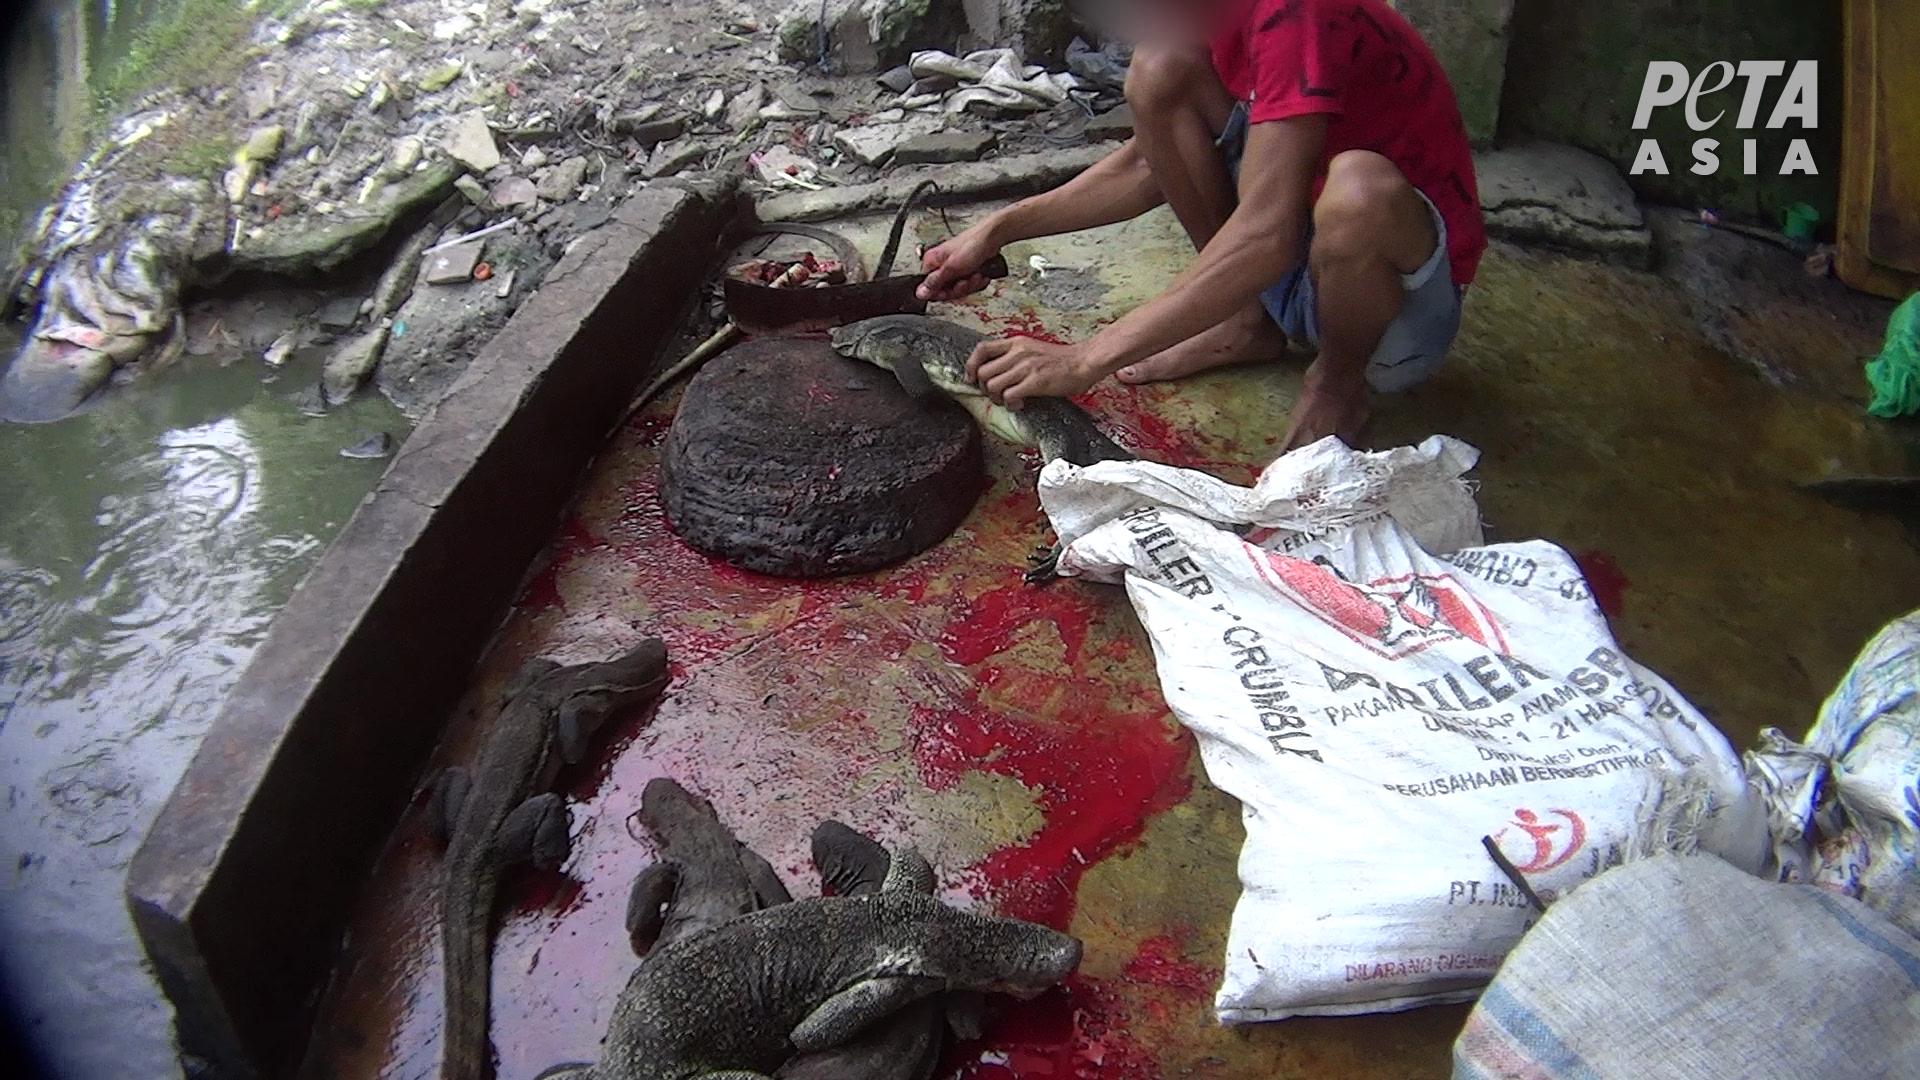 Live Lizards Tossed Around and Hit With Machetes.